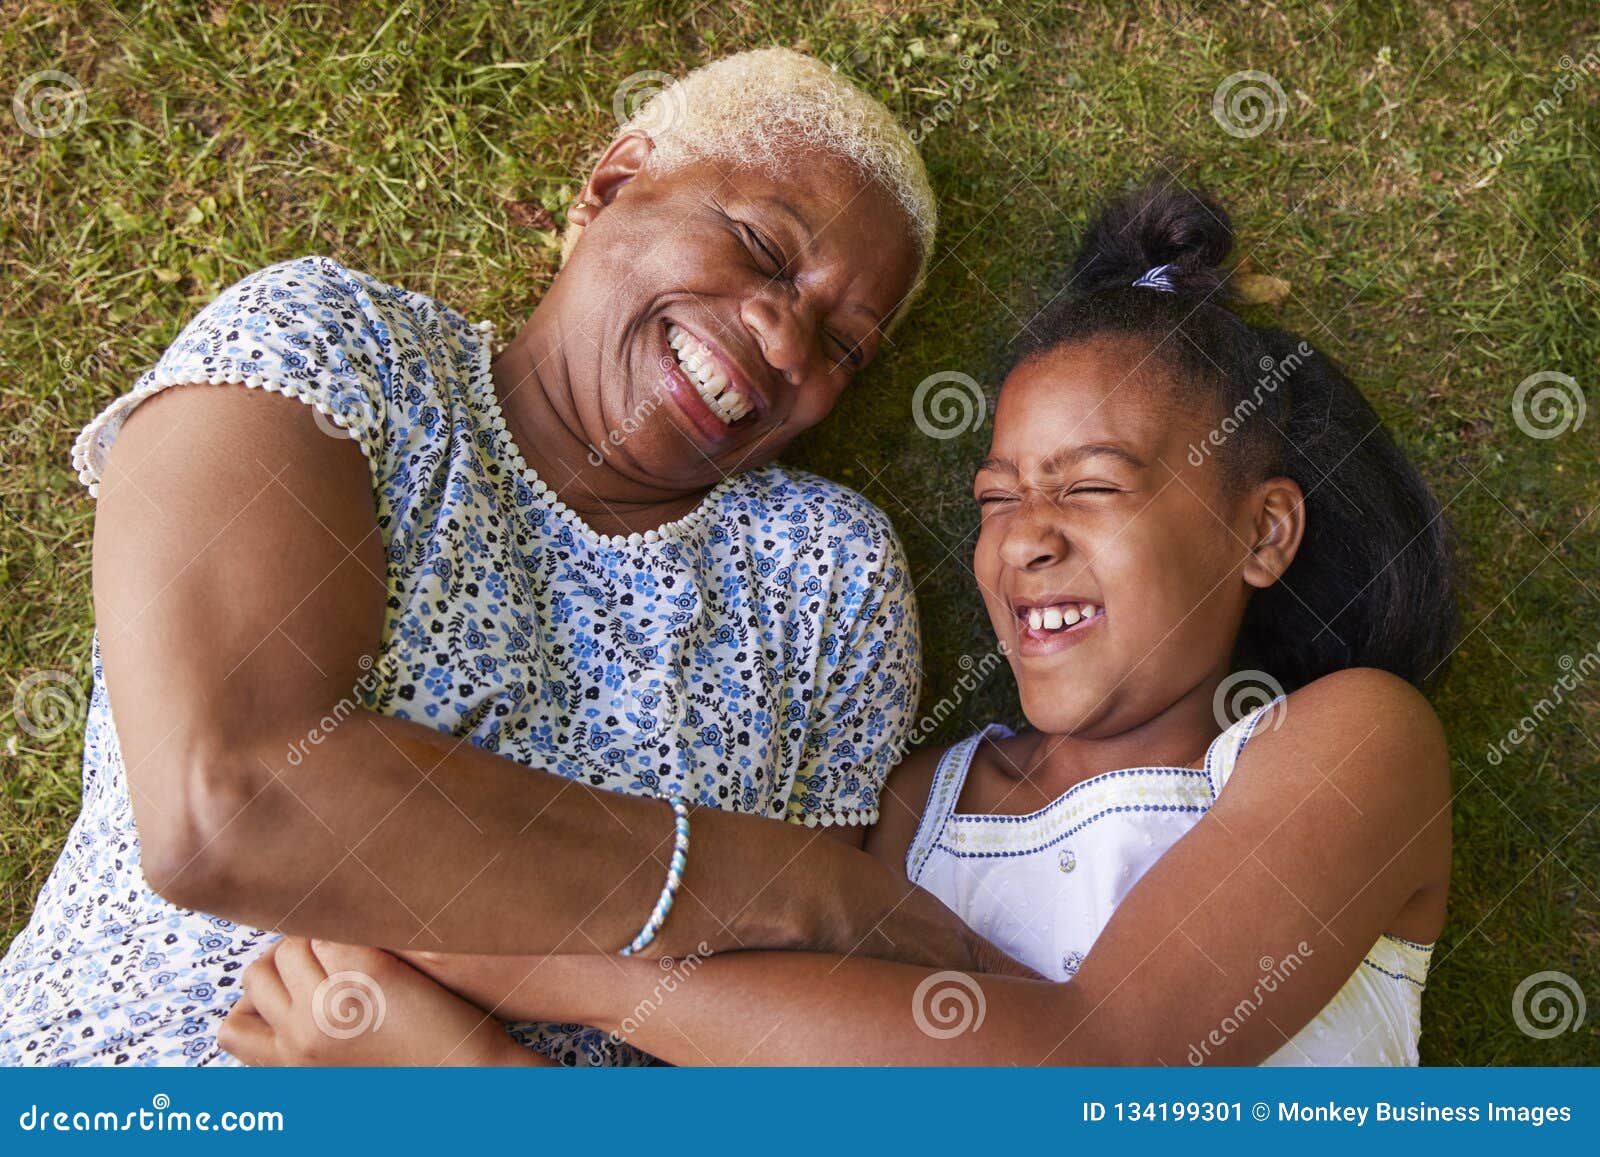 black girl and grandmother lying on grass, overhead close up